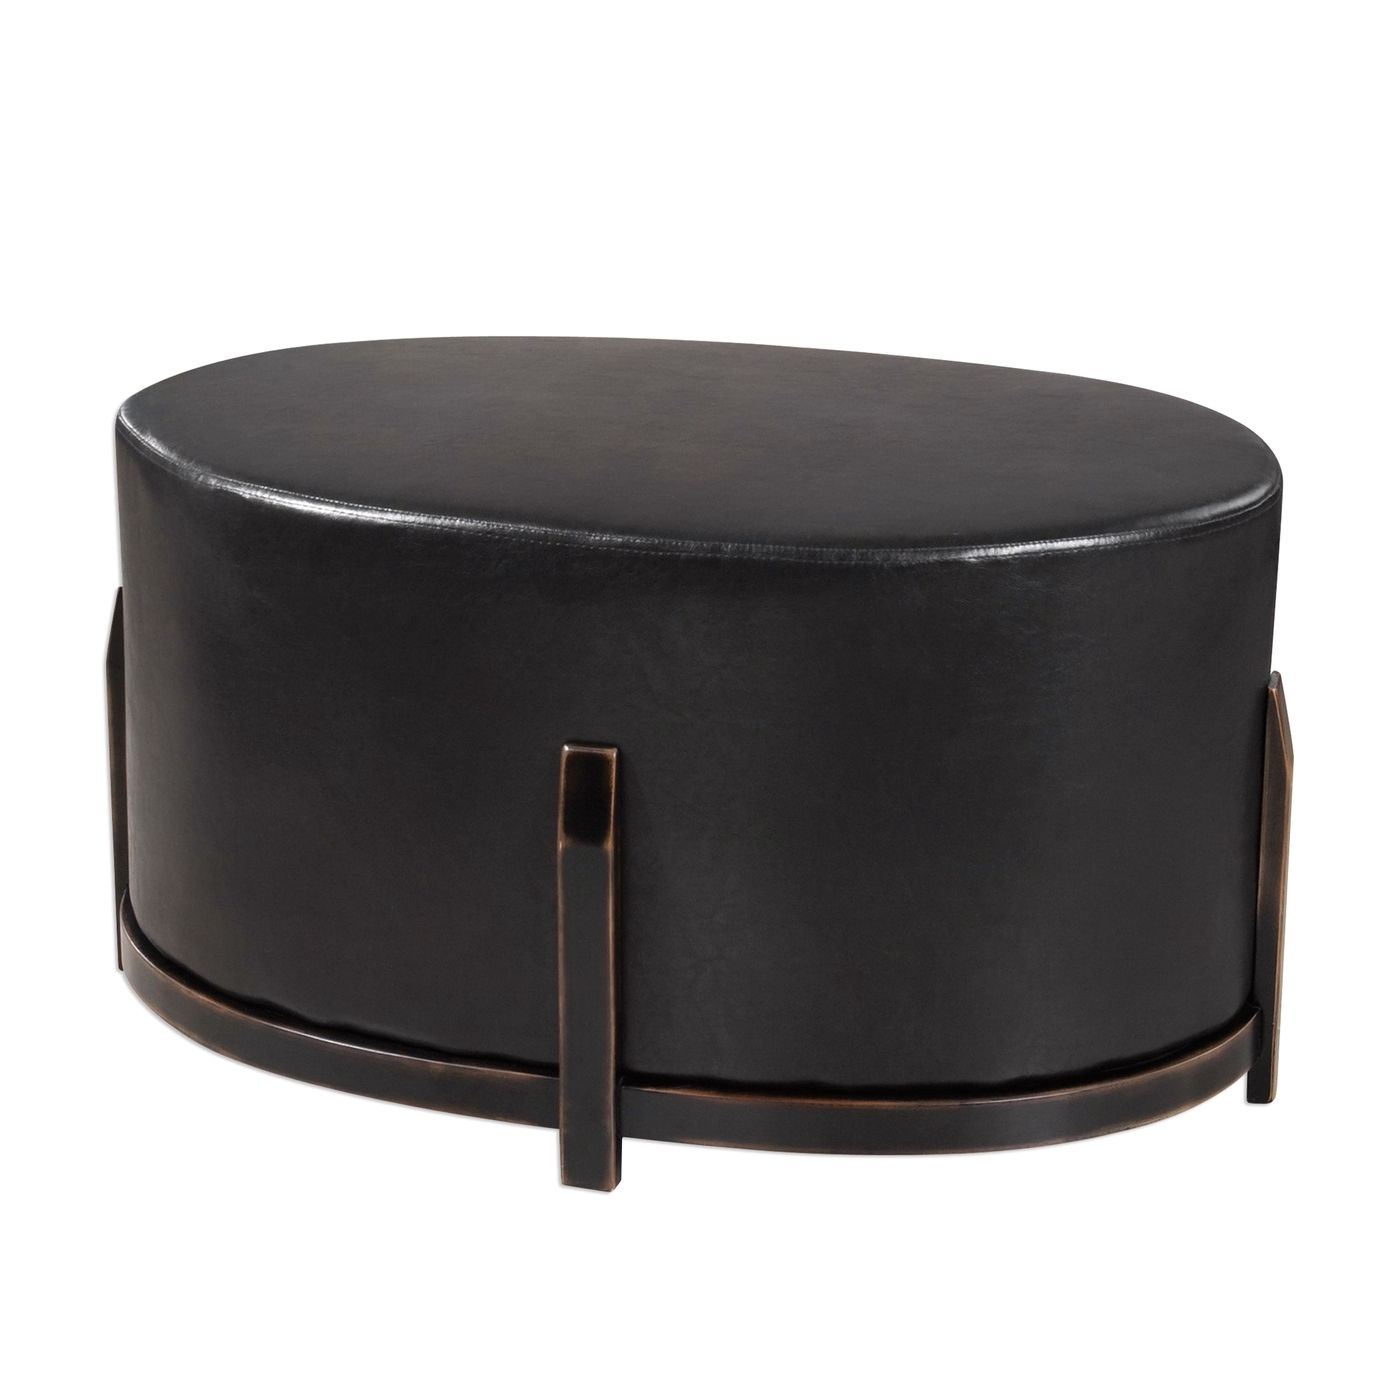 Desta Cushioned Espresso Brown Faux Leather Ottoman With Black Wood Frame Intended For Black White Leather Pouf Ottomans (View 13 of 20)